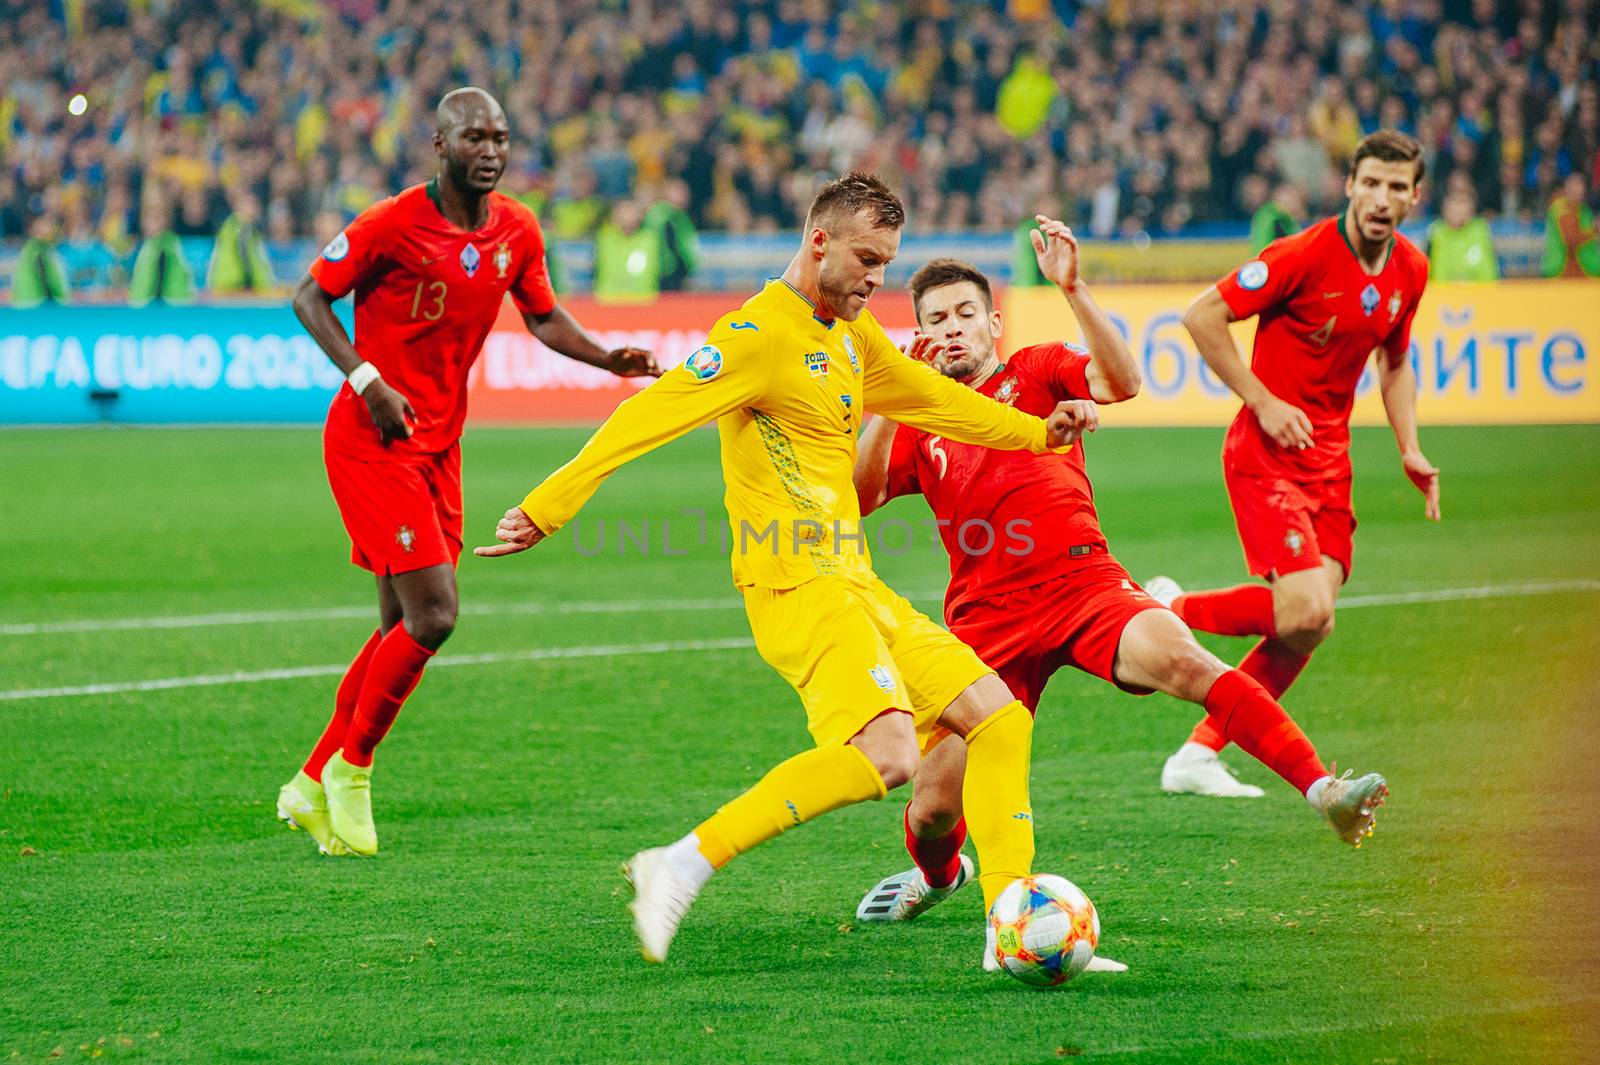 Football match of the qualifying EURO 2020 Ukraine vs Portugal at the Olympic Stadium by Vitleo